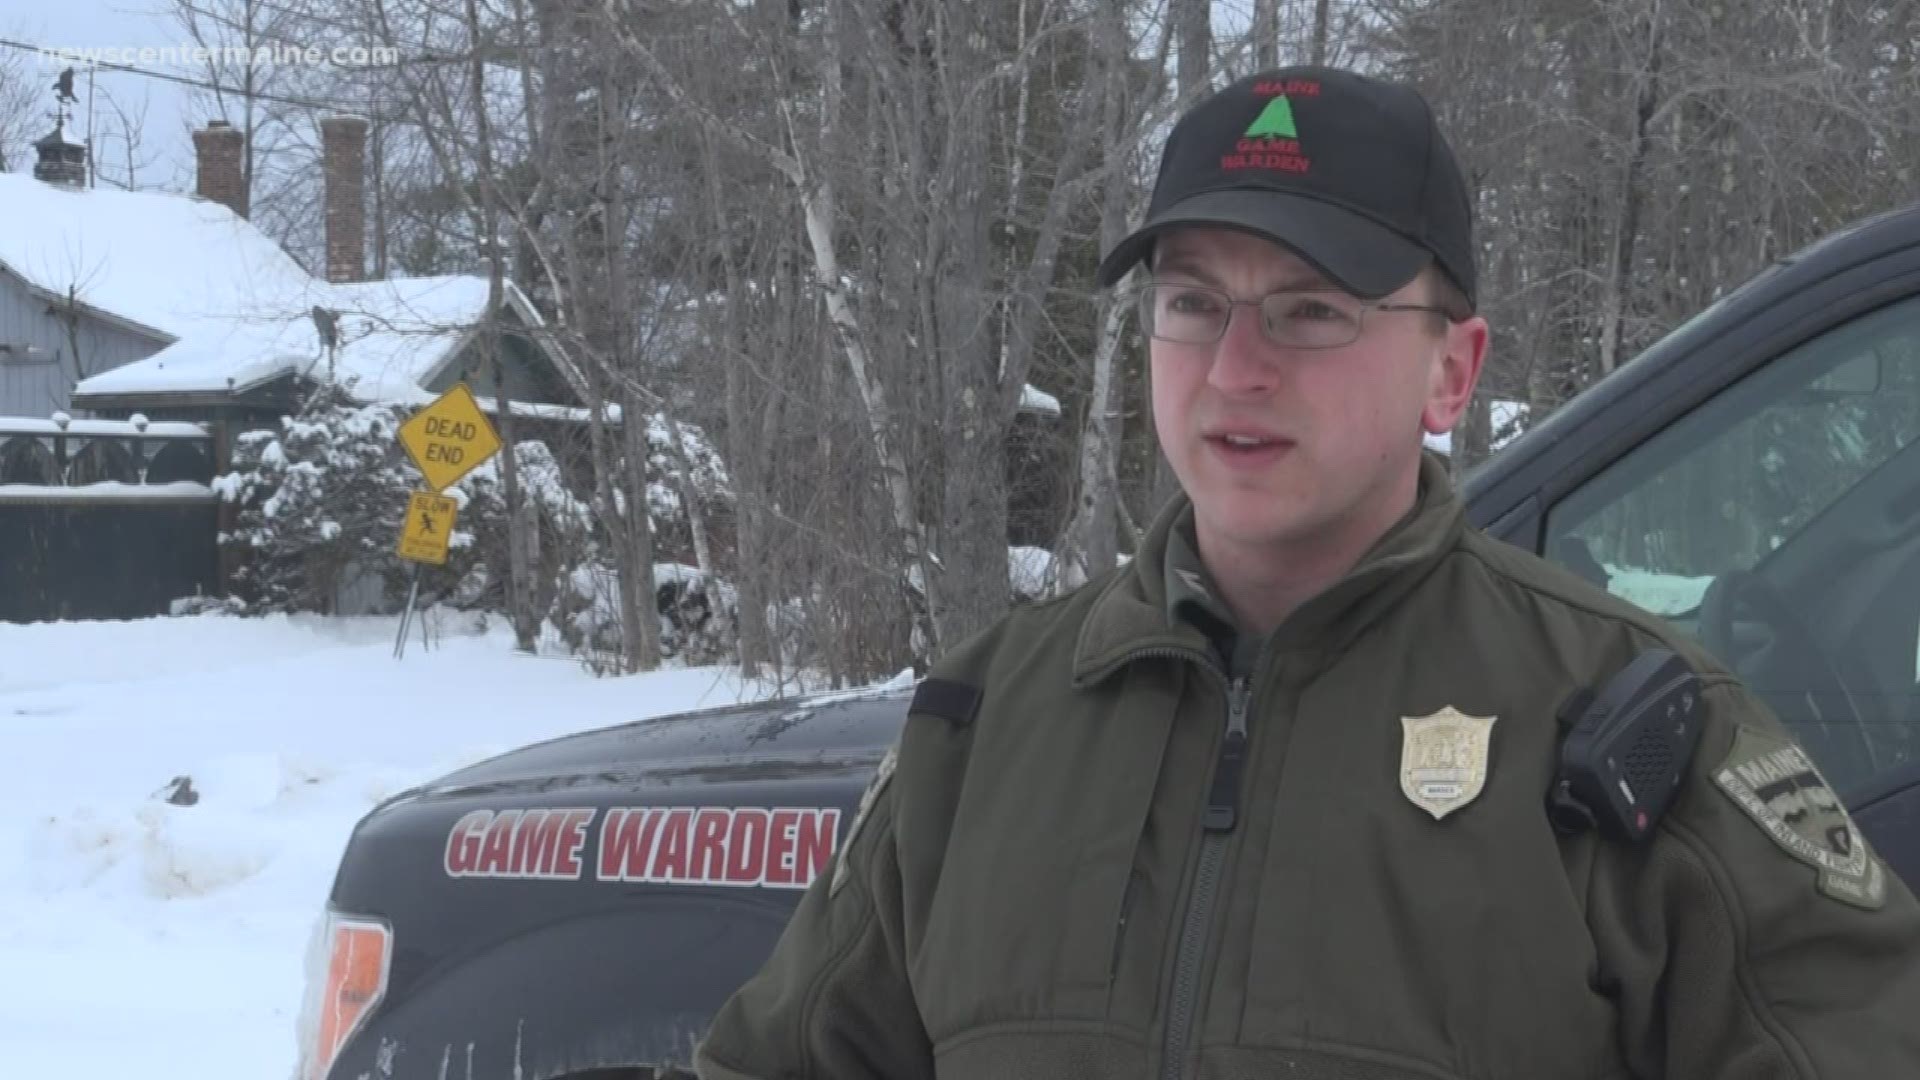 Game wardens transitioning to modern age